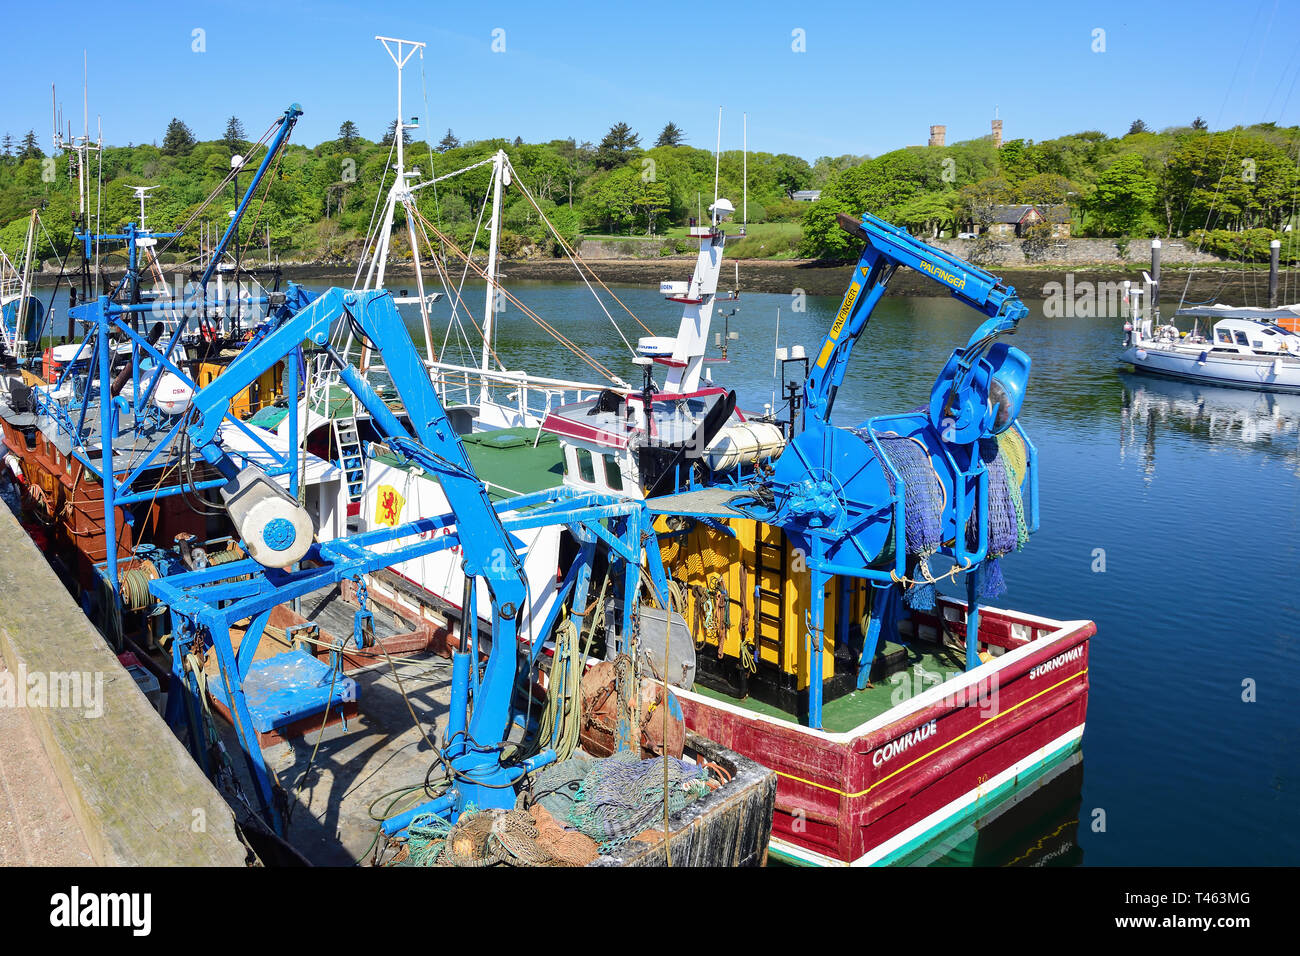 Fishing boats moored in Stornoway Harbour, Stornoway, Isle of Lewis, Outer Hebrides, Na h-Eileanan Siar, Scotland, United Kingdom Stock Photo